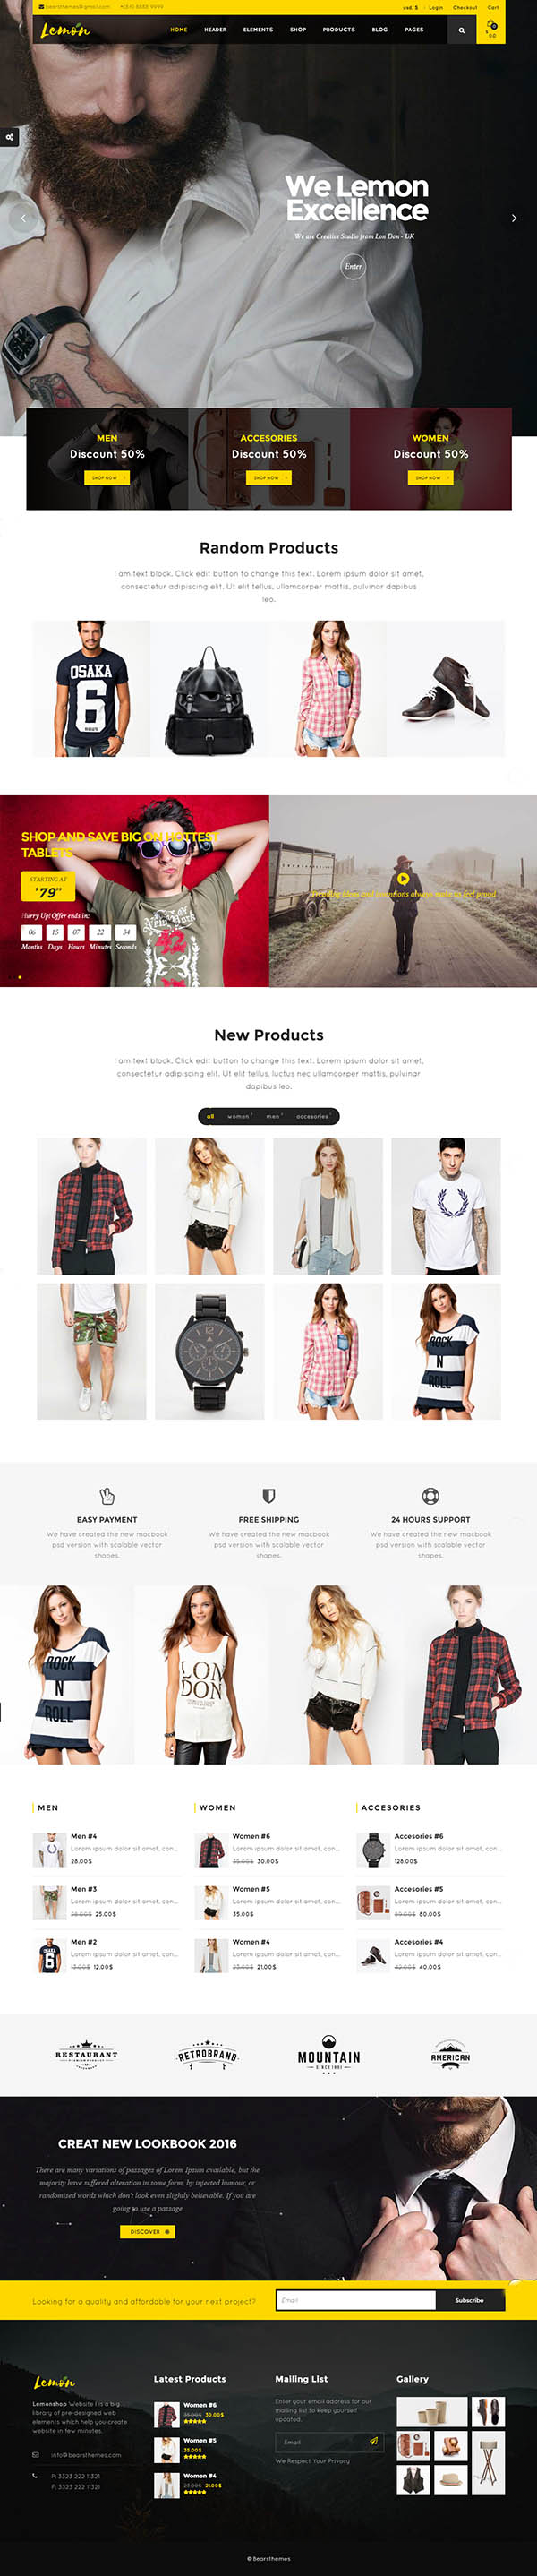 Lemon : A Clean and Smooth WooCommerce WordPress Theme